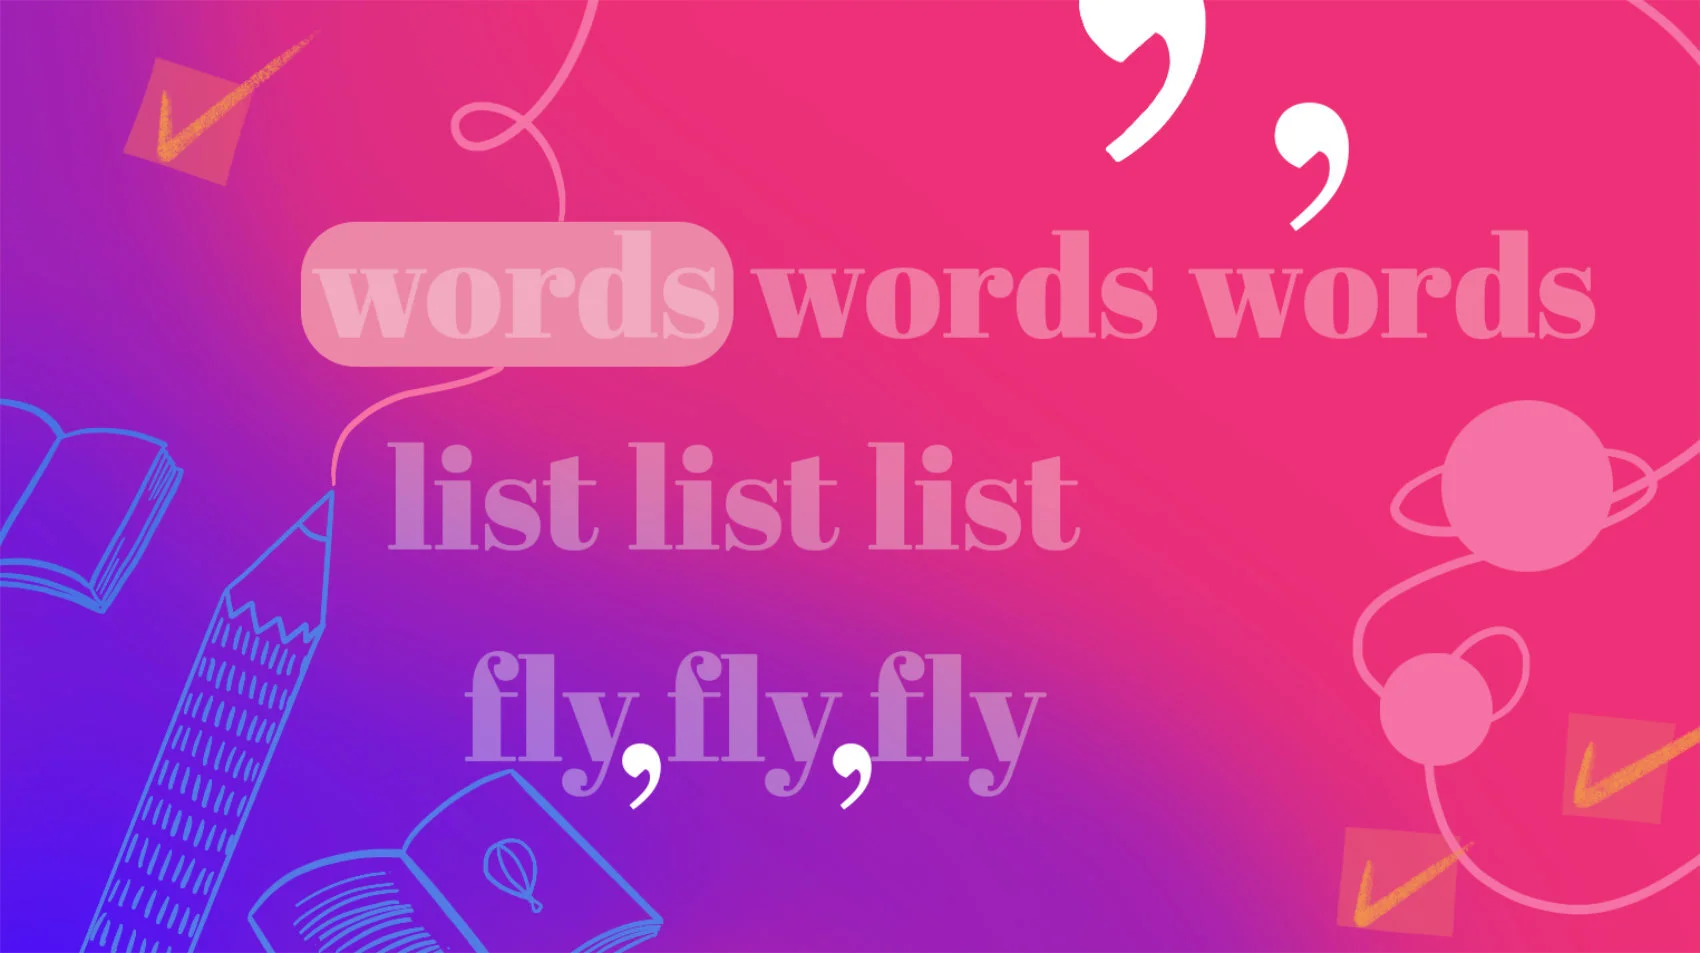 Illustration with the text "words words words list list list fly, fly, fly"